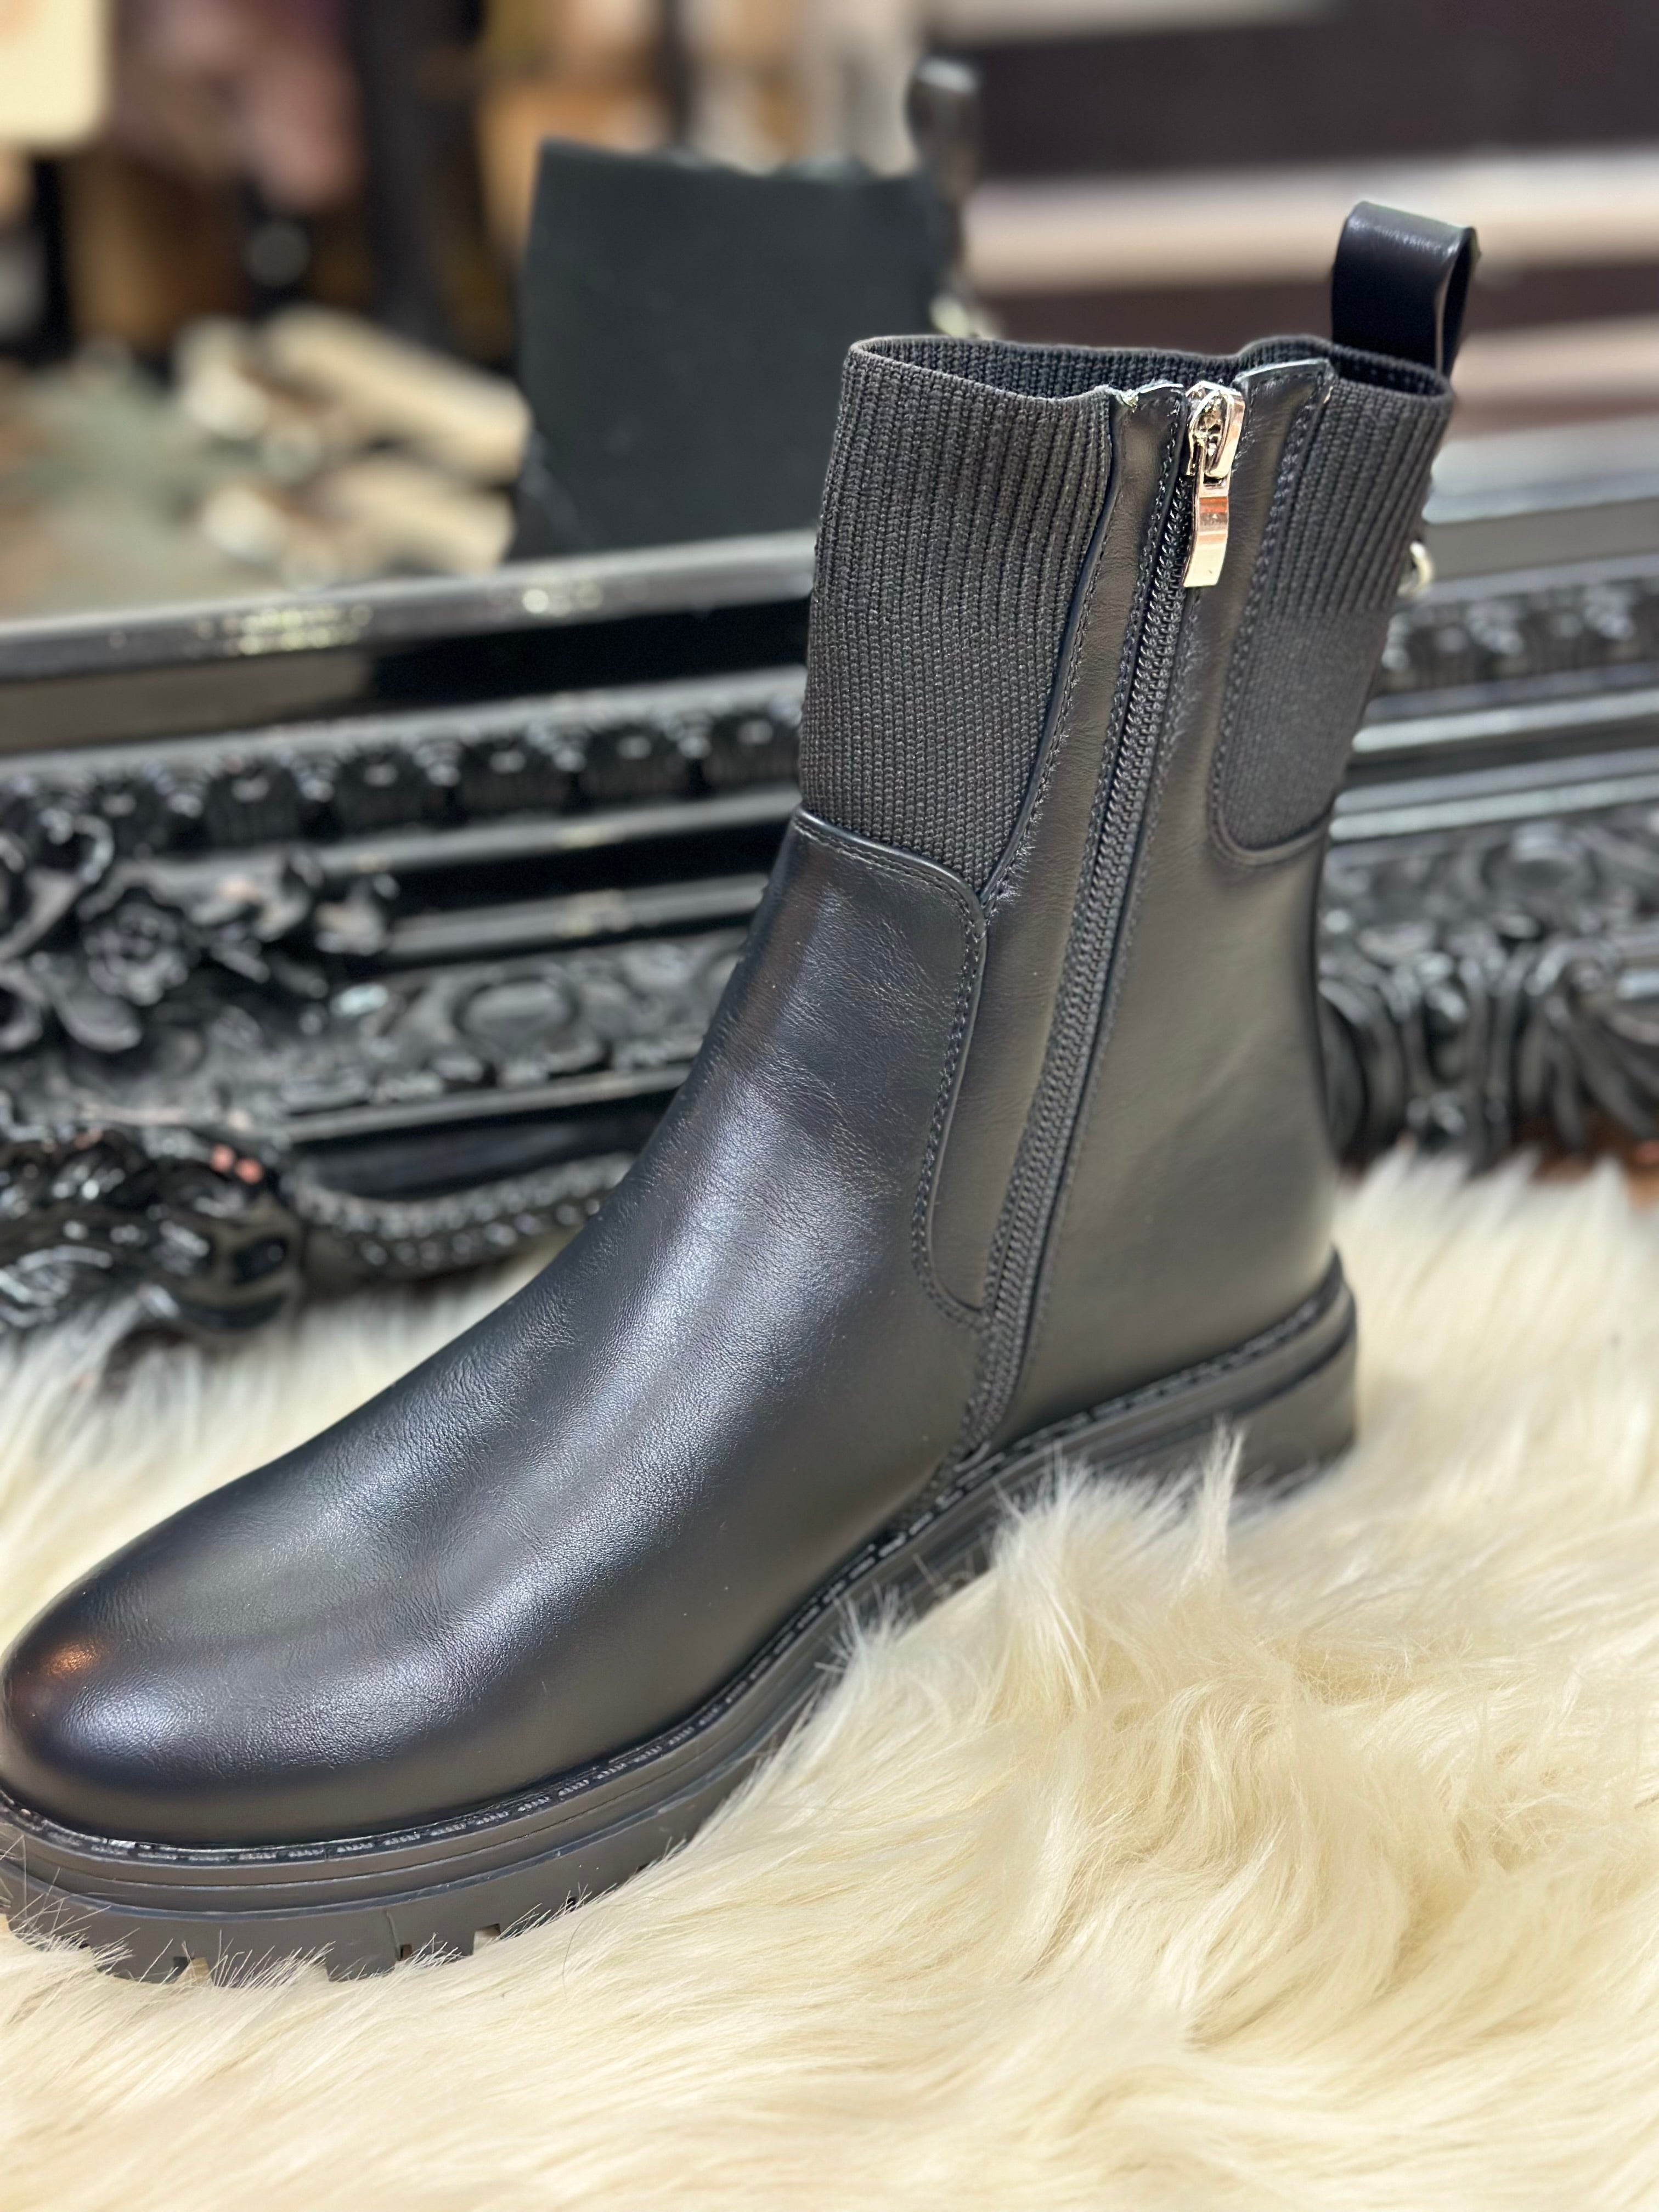 DIXIE ANKLE SOCK BOOT -SALE now